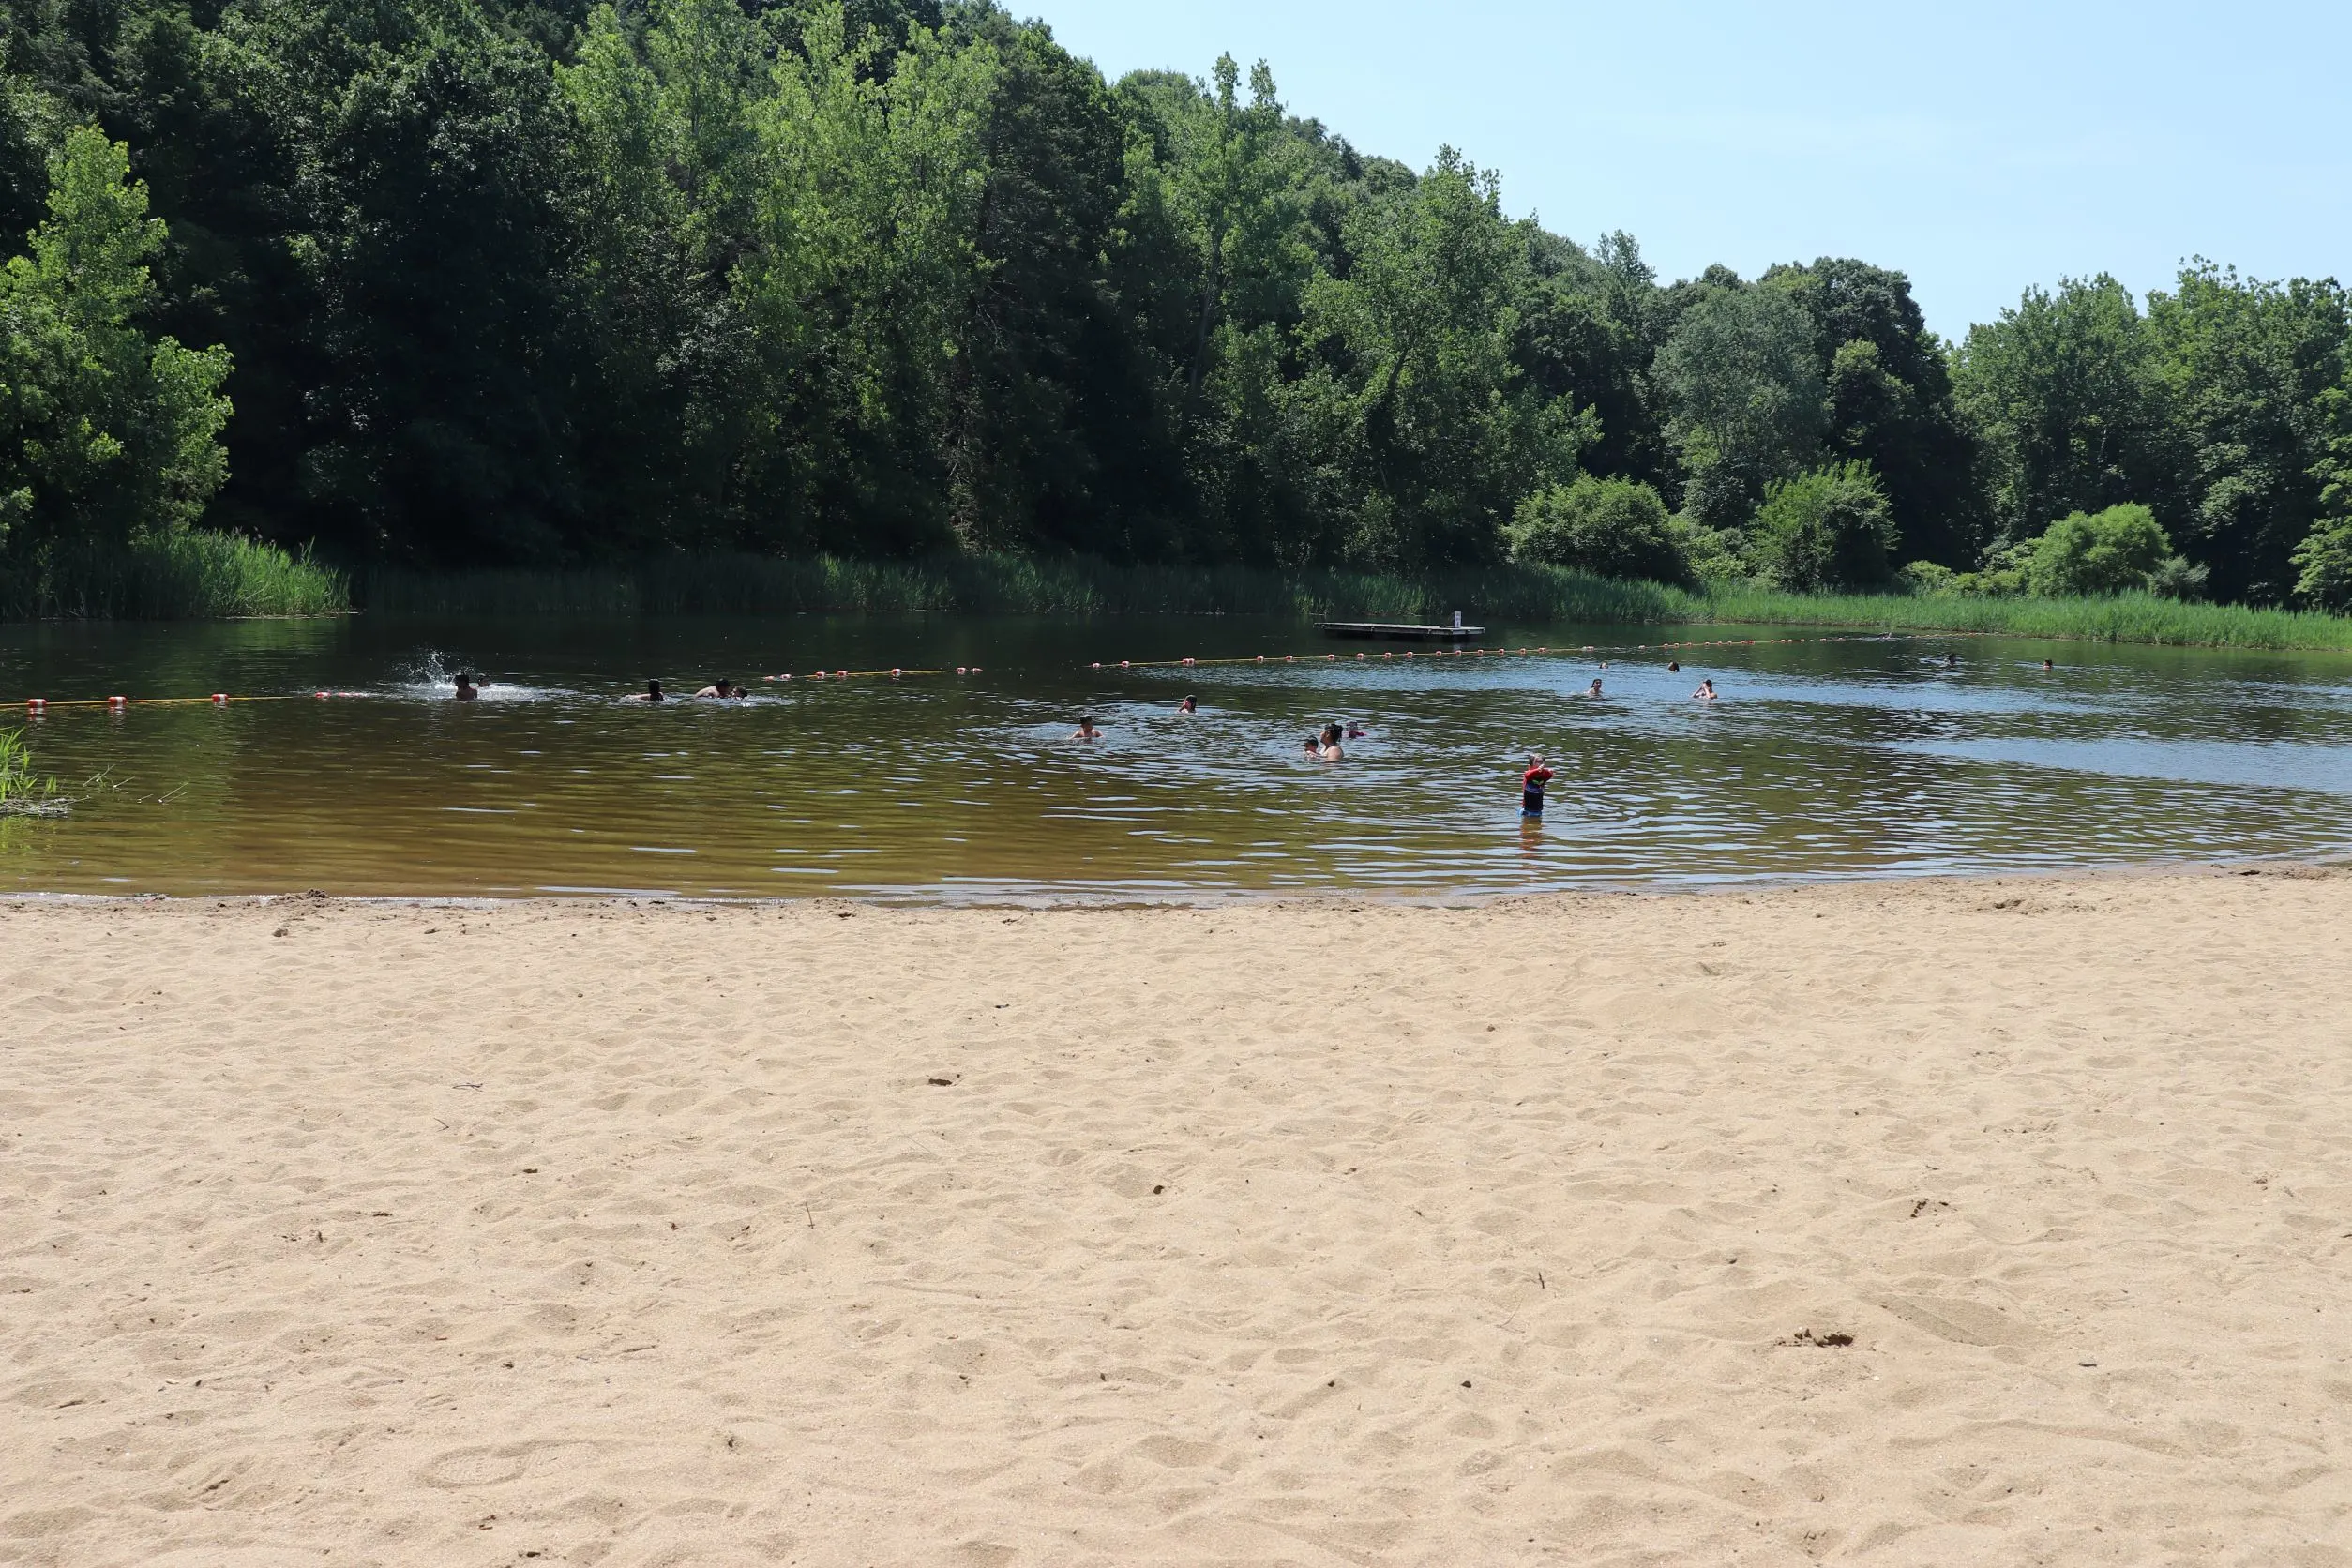 image of kids swimming at beach in wadsworth state park in middletown ct.